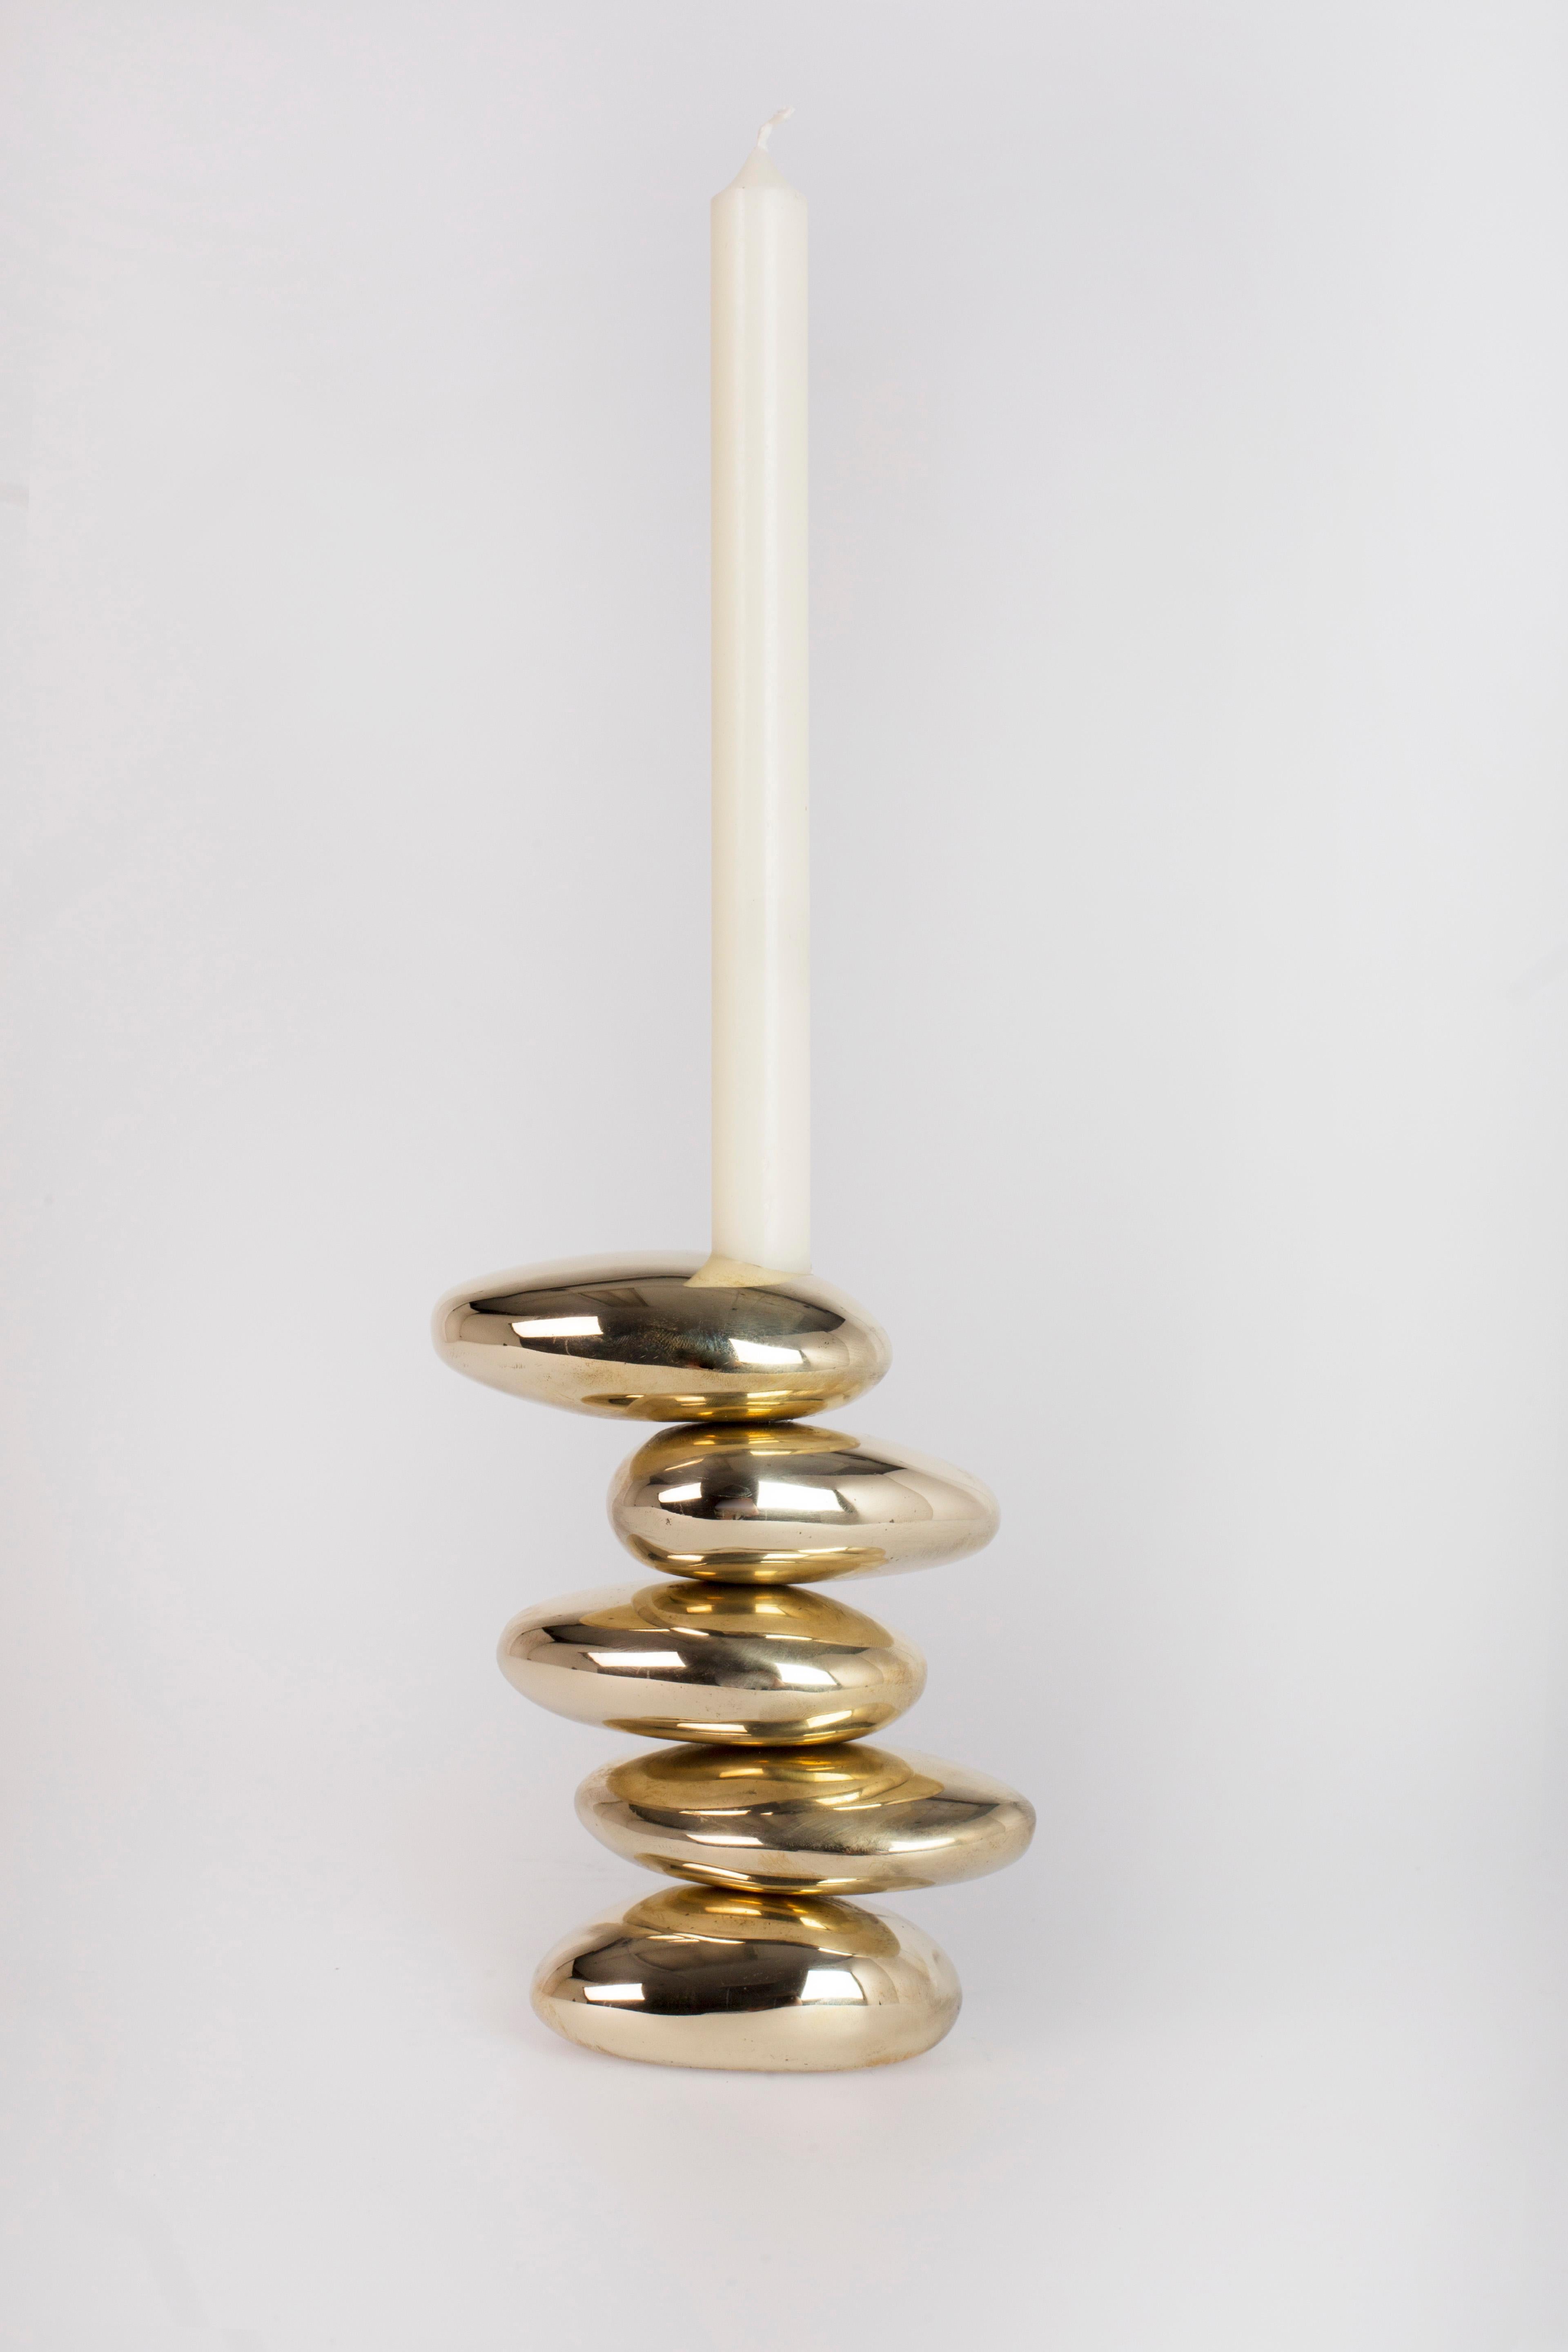 American Contemporary Blackened and Polished Brass 5 Stack 'Stone' Candleholder by Konekt